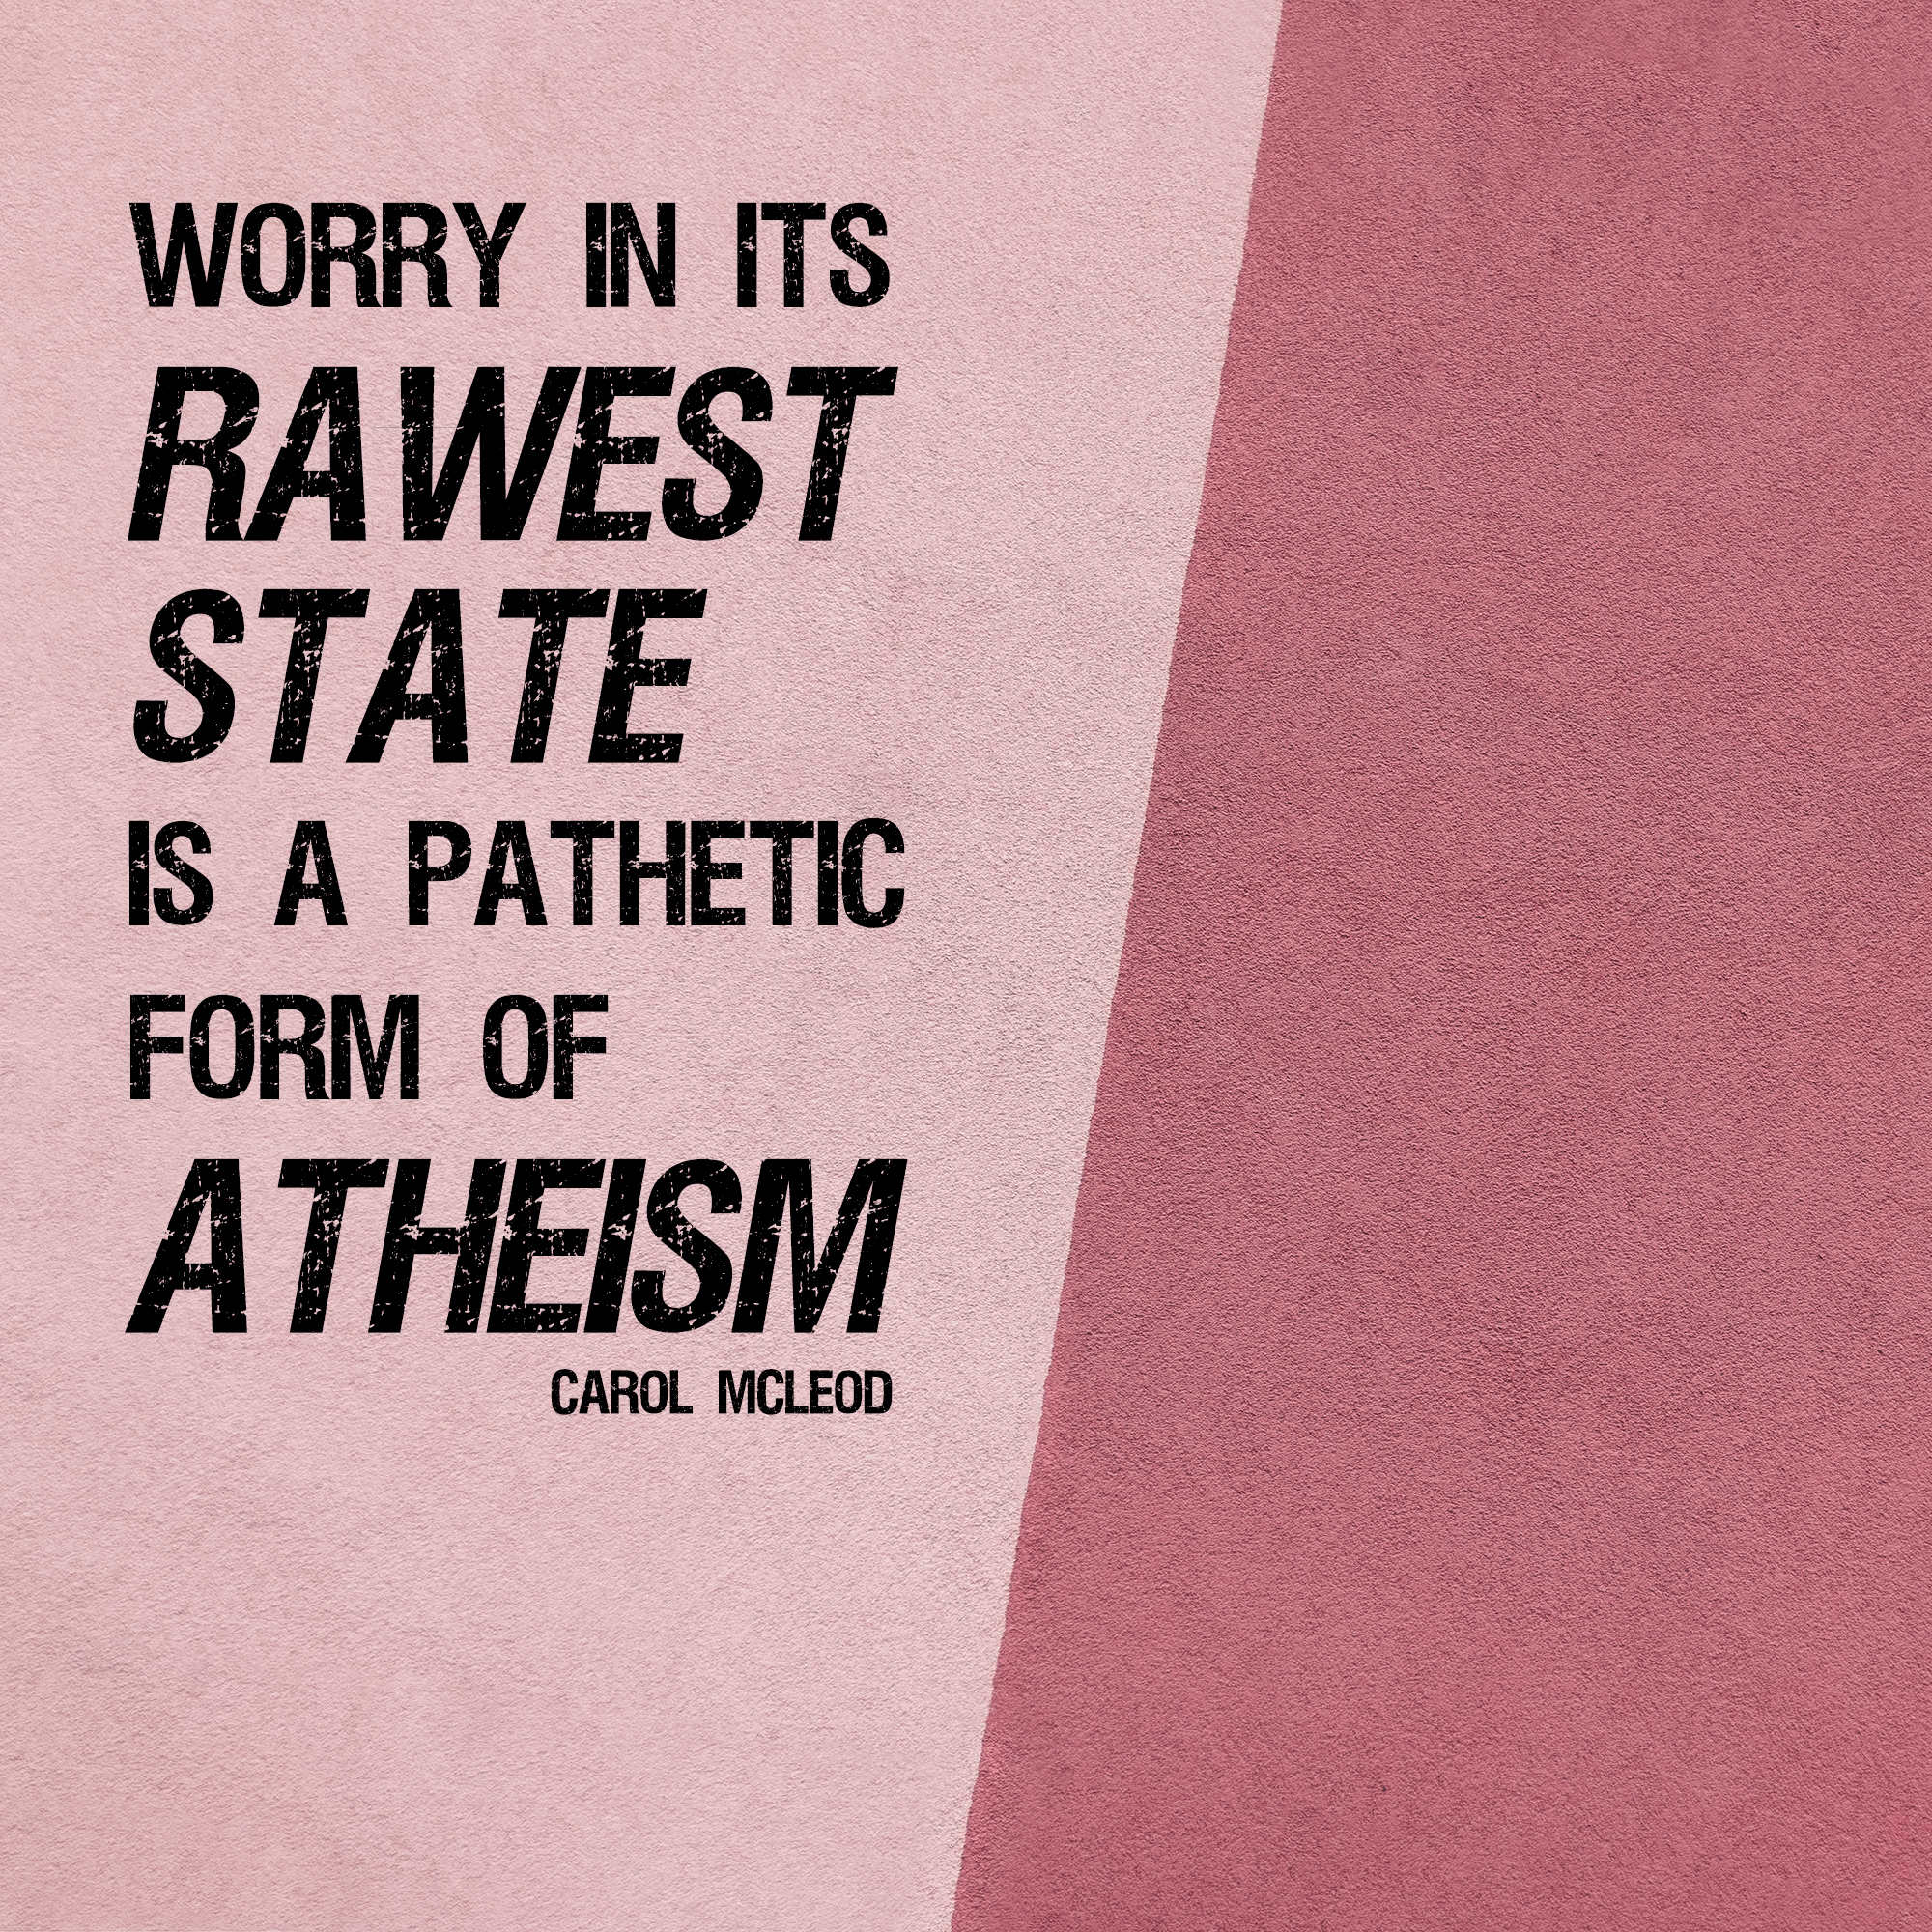 Worry in its rawest state is a pathetic form of atheism - Carol McLeod